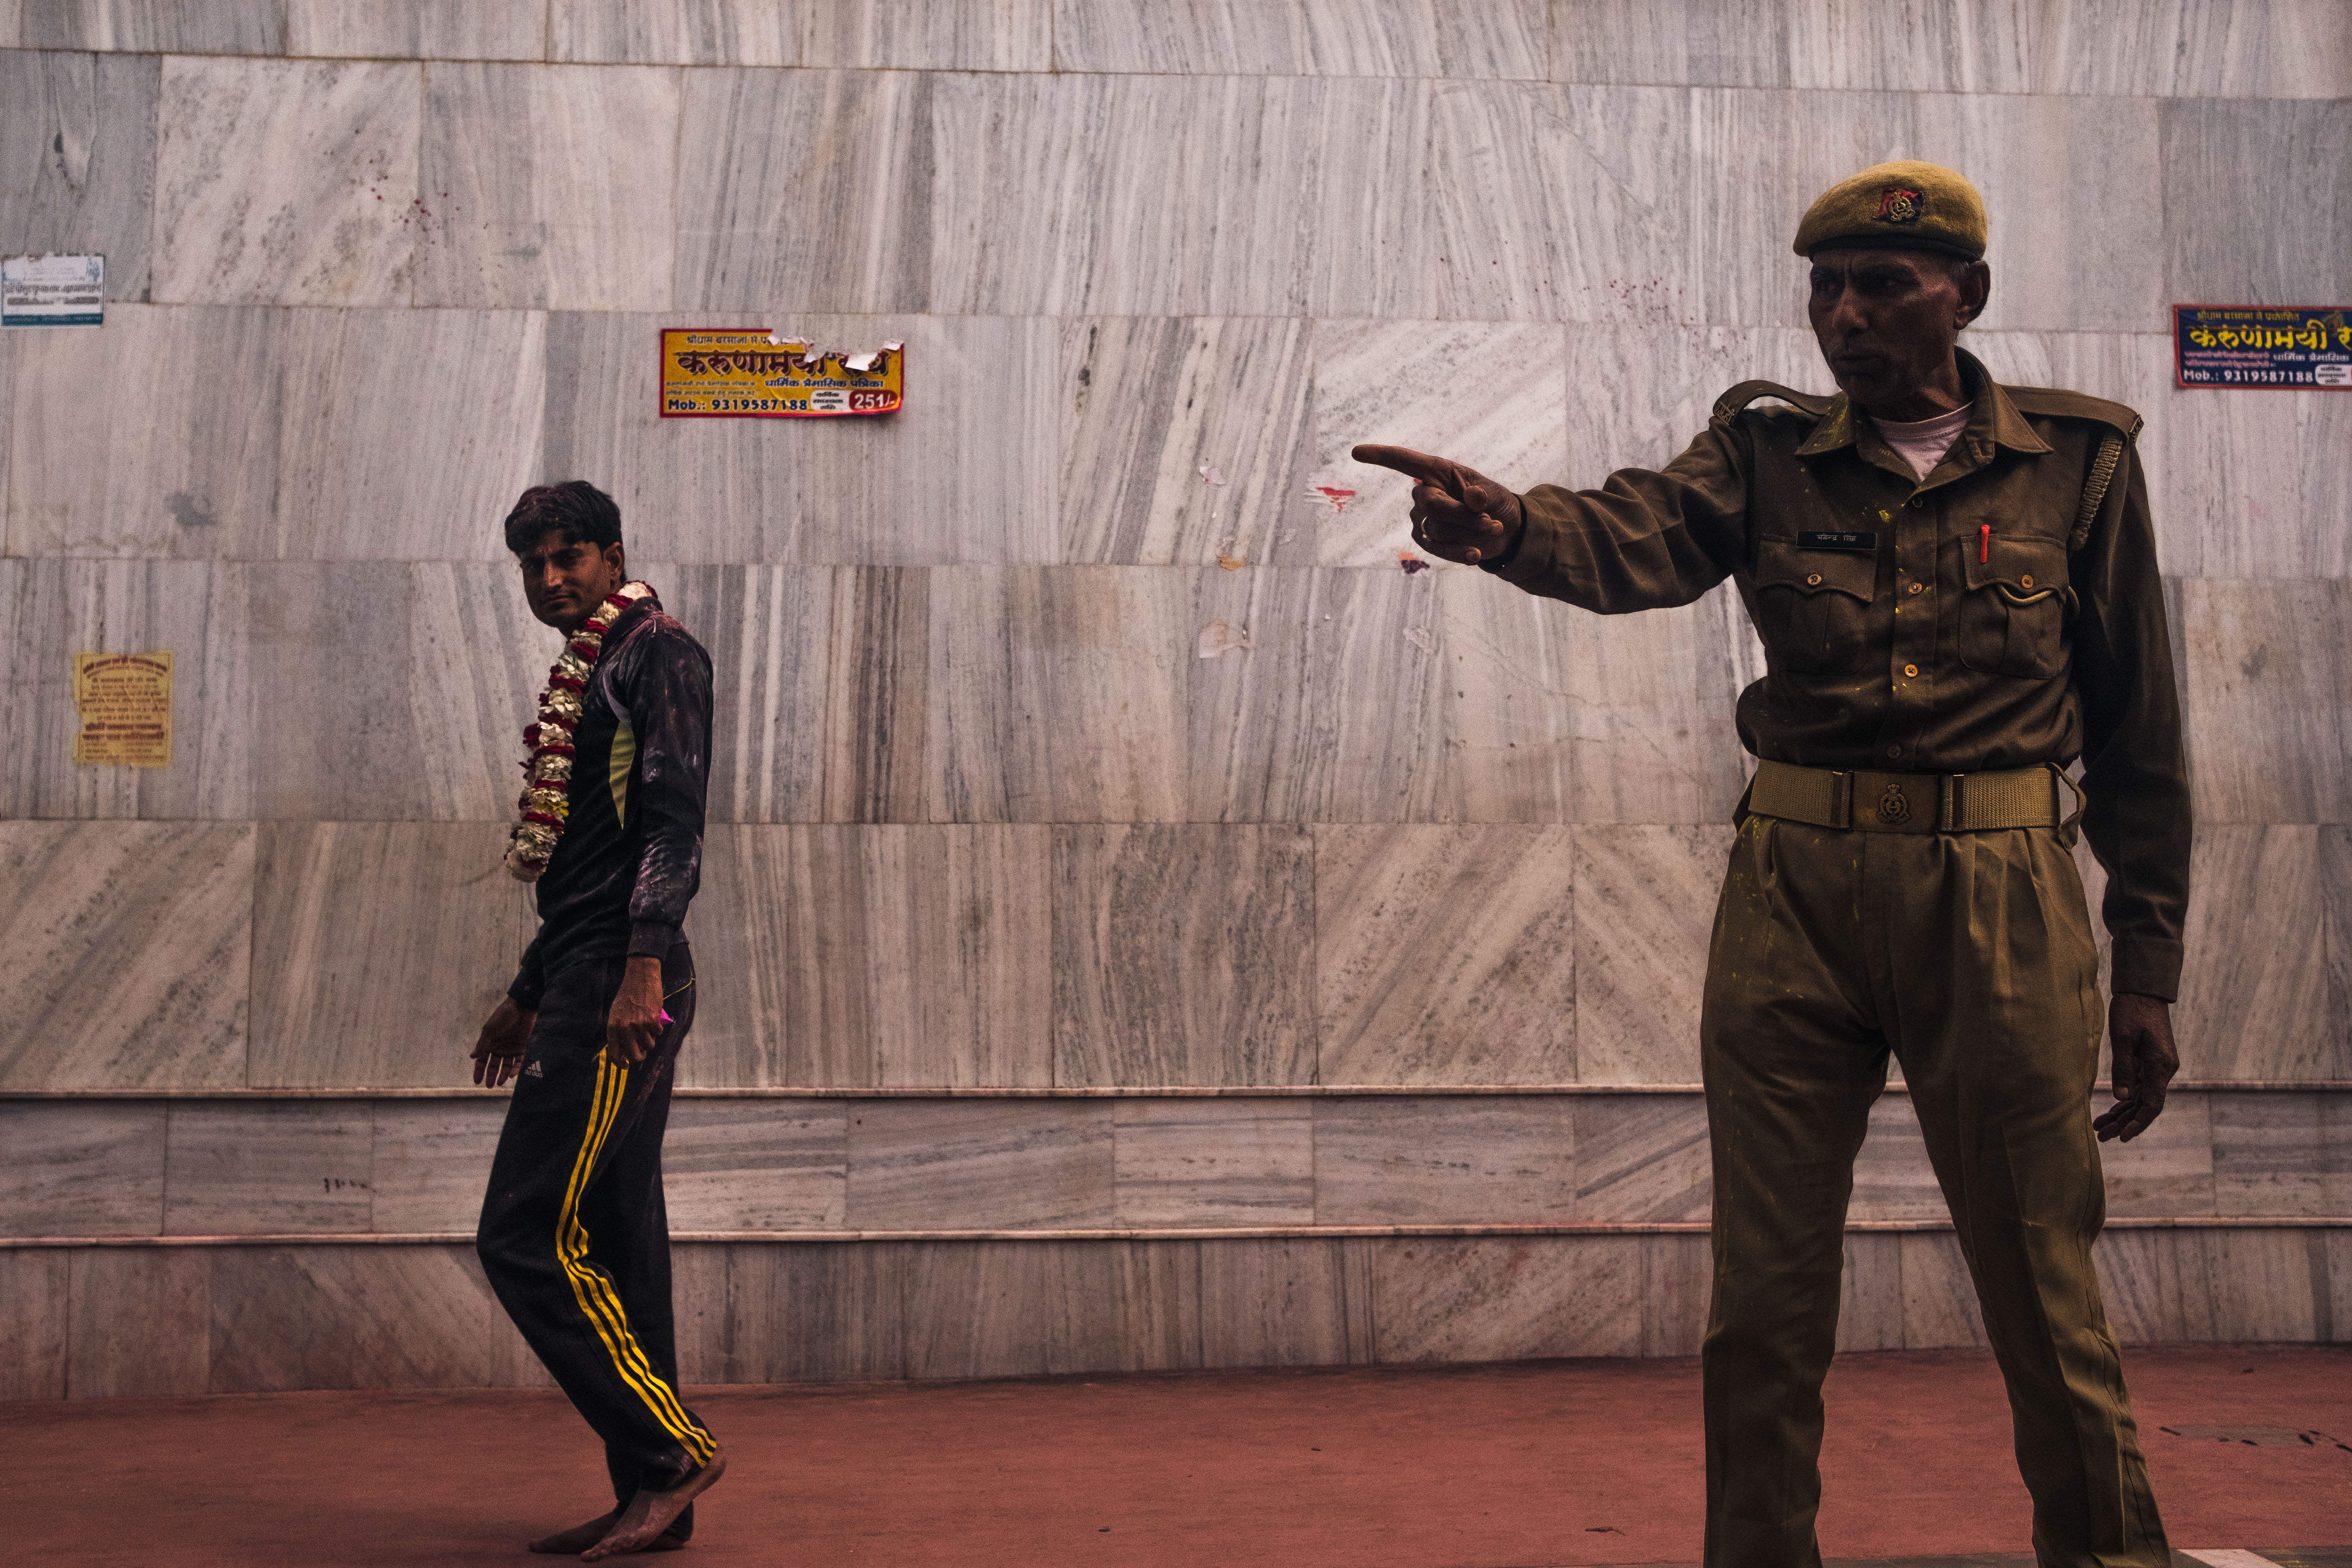 India Street Photography During Holi Festival. security guard asks panhandlers to leave the temple . Images by Jason Vinson